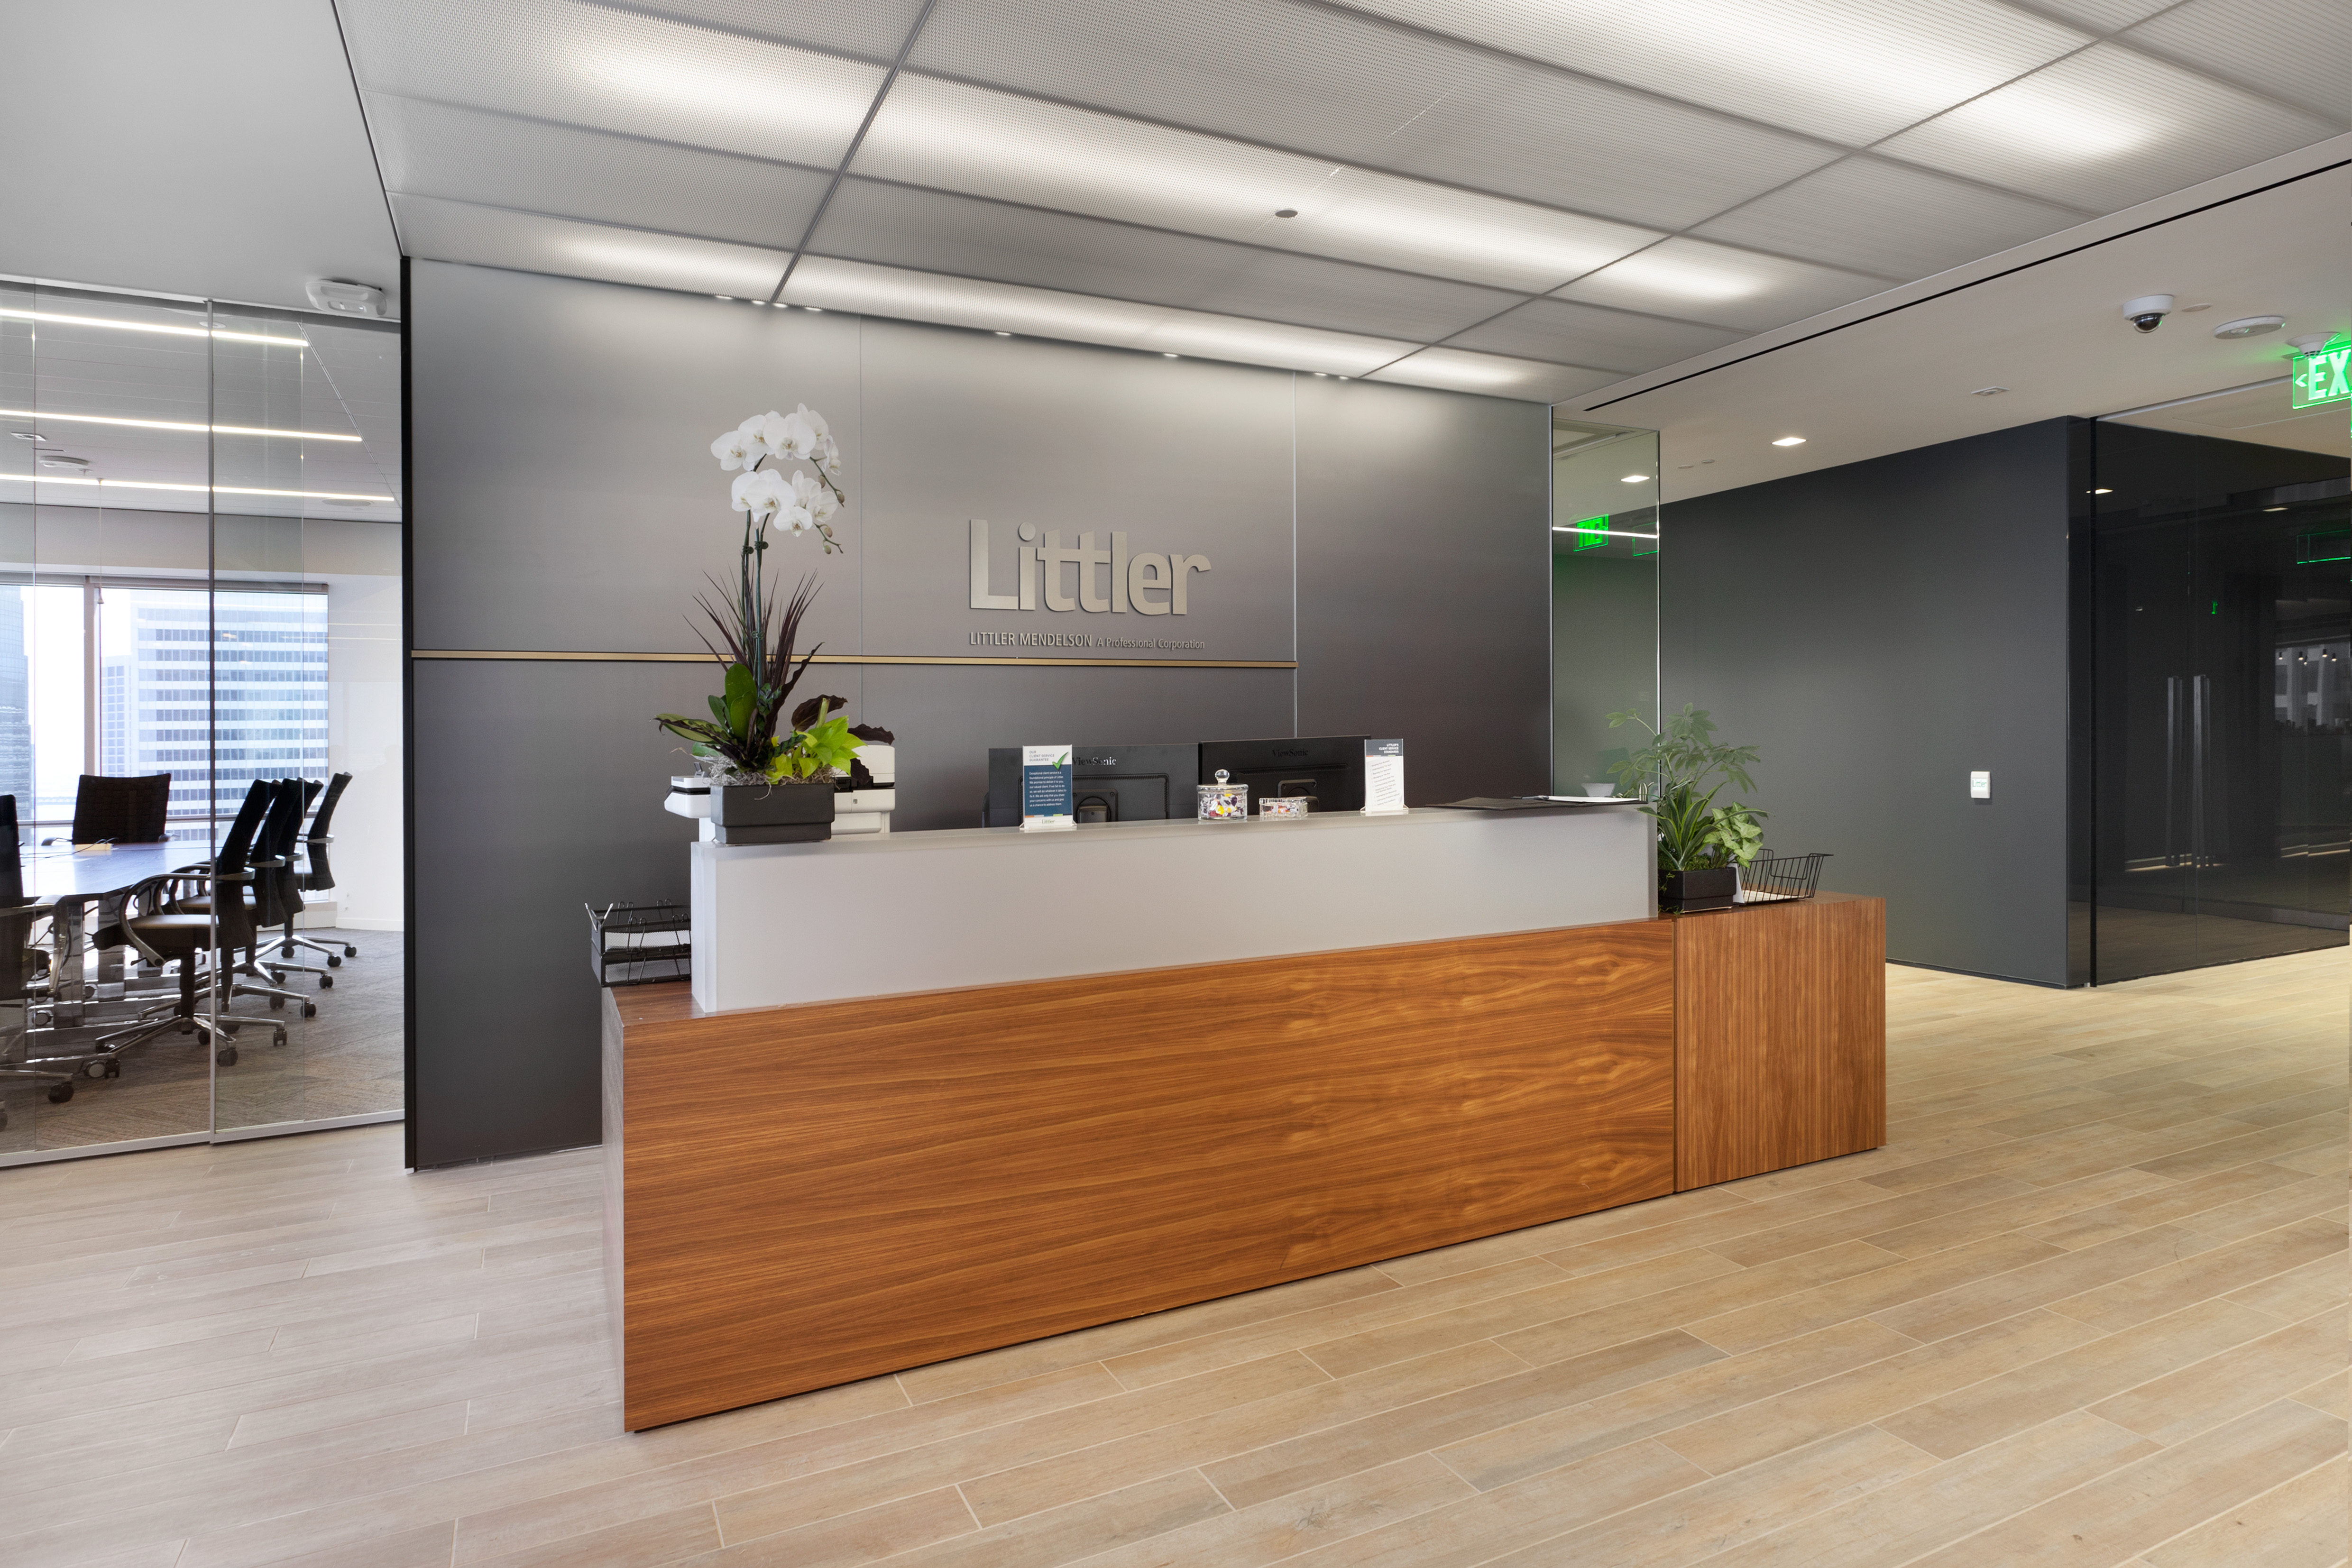 Is 120 SF per office too small for attorneys? Littler Mendelson’s experience says “No”